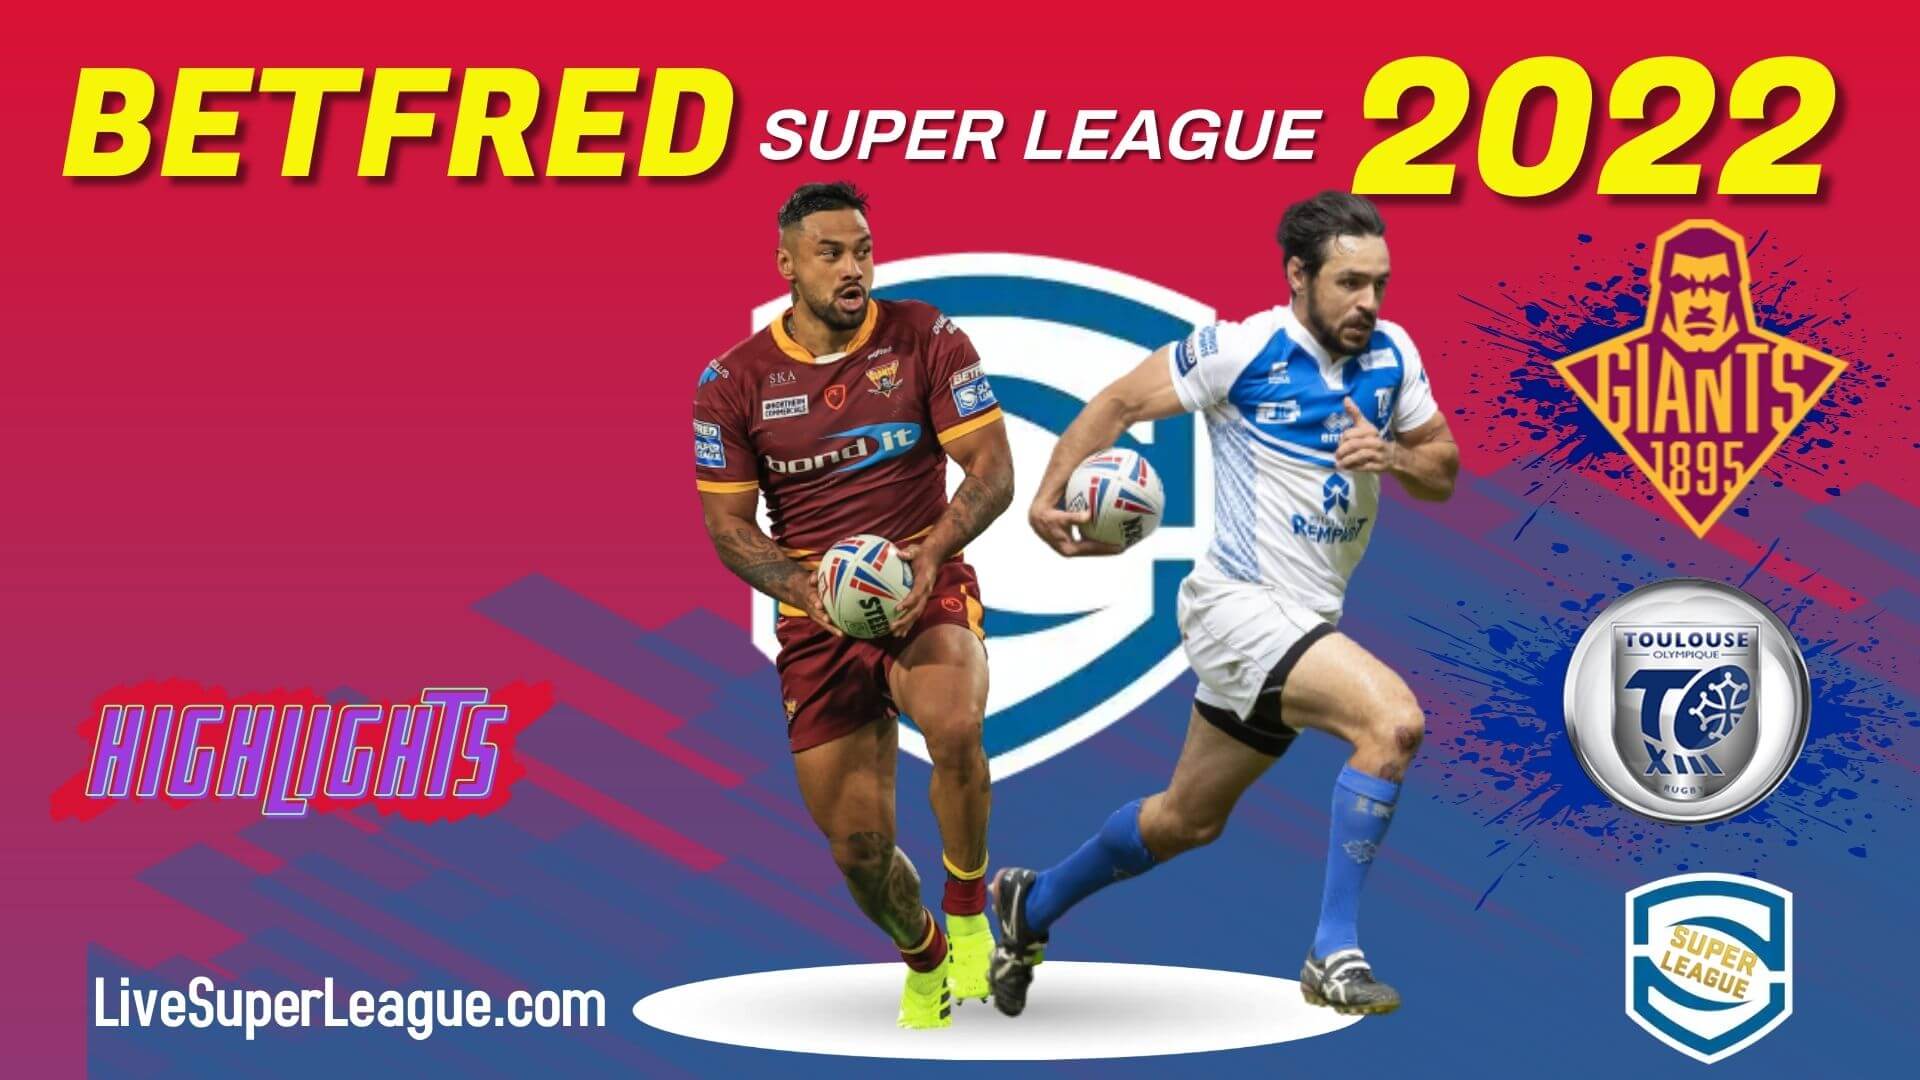 Huddersfield Giants Vs Toulouse Highlights 2022